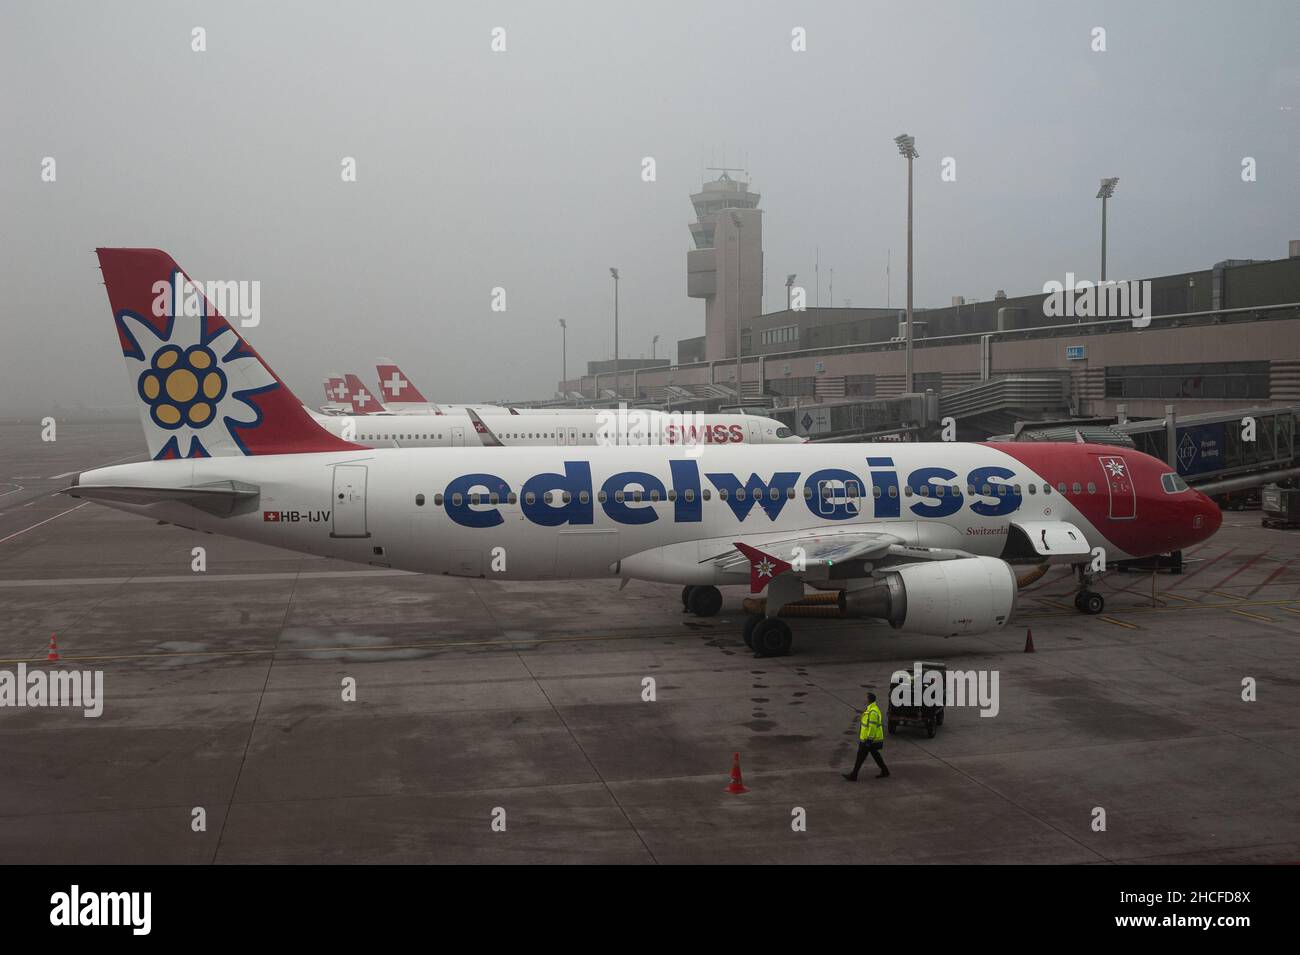 14.12.2021, Zurich, Switzerland, Europe - An Edelweiss Air Airbus A320 passenger aircraft is parked at a gate of Terminal A at Zurich Airport. Stock Photo